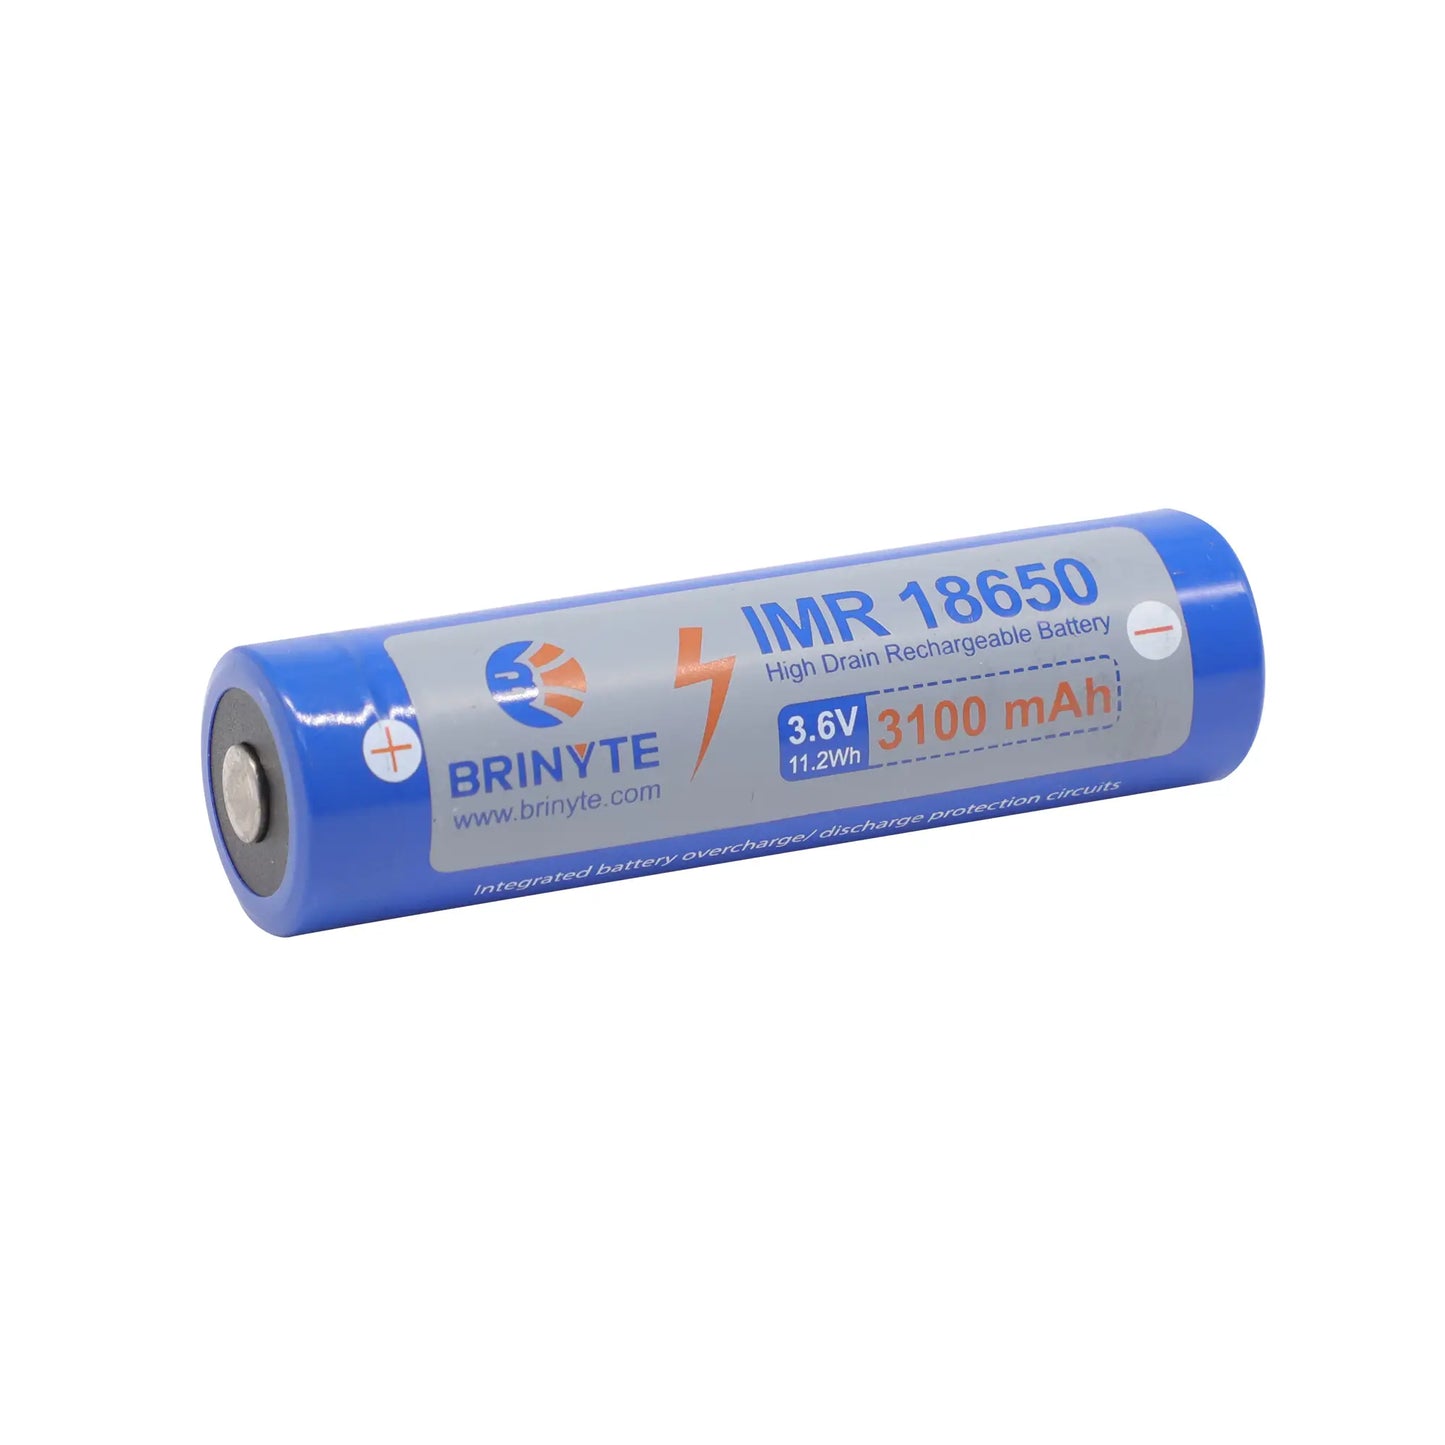 Brinyte Spare Rechargeable 18650 Battery